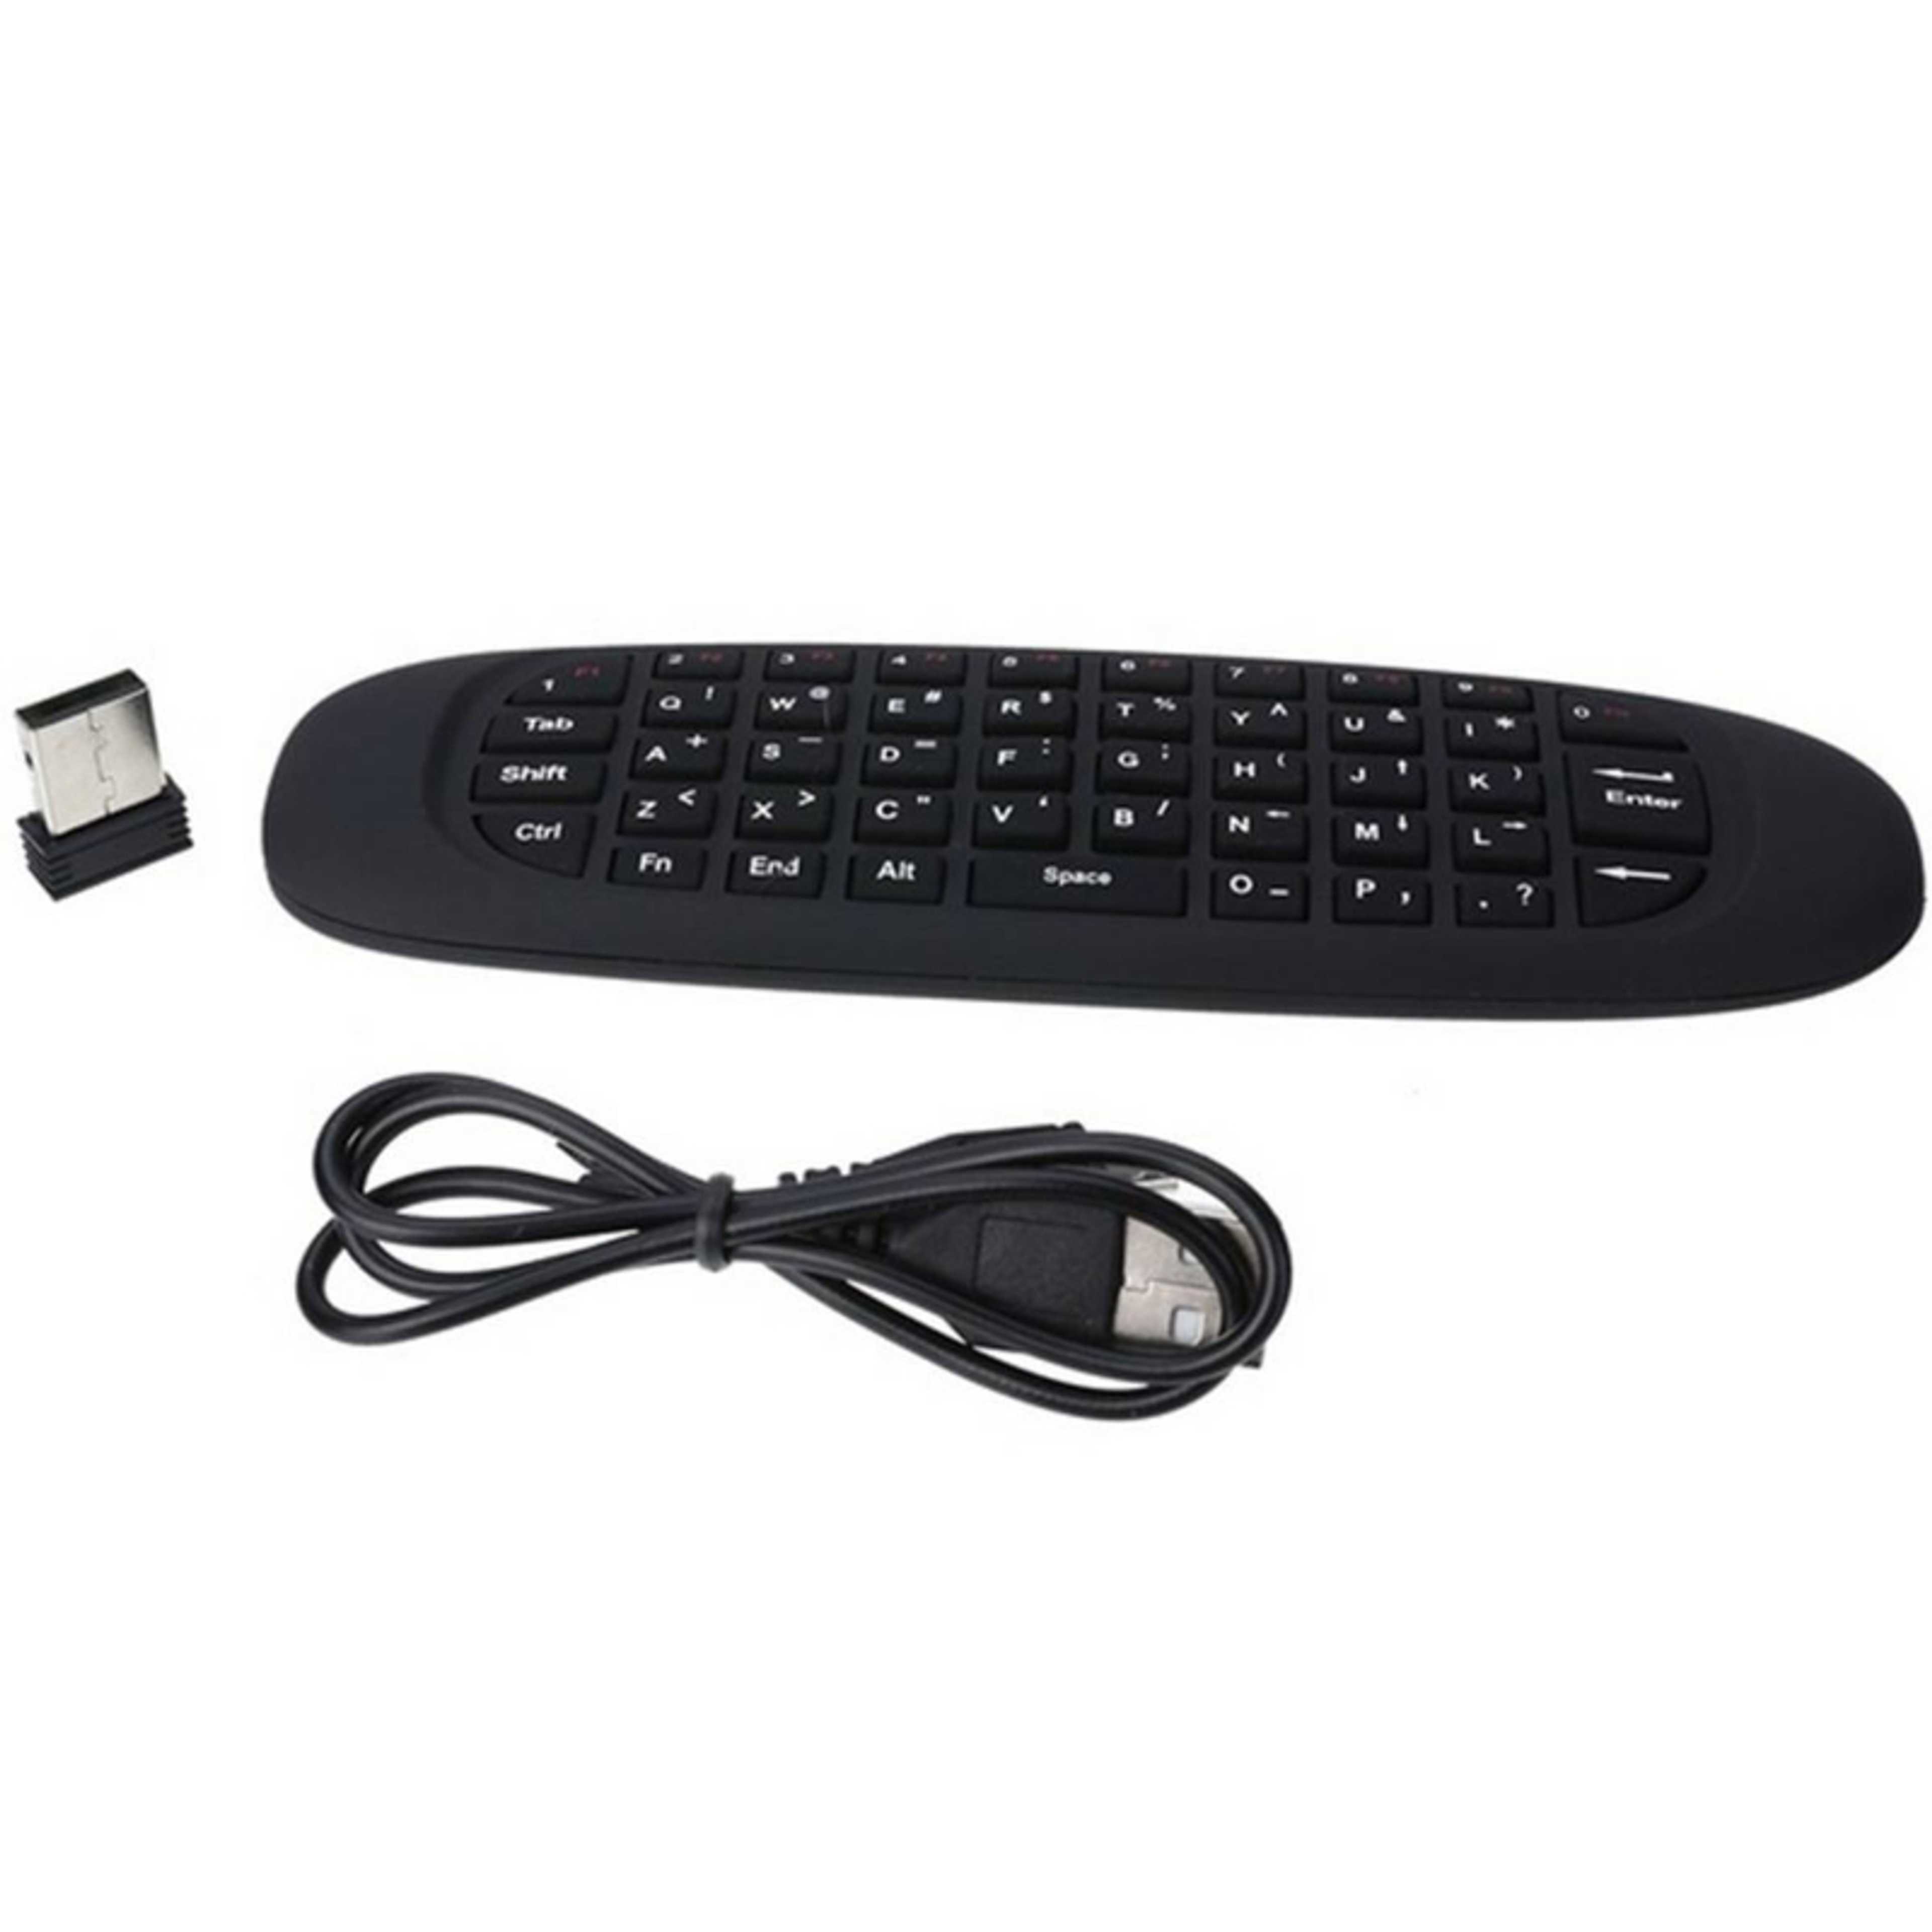 2.4GHz Flying Mouse 6-Axis Gyroscope Wireless Air Mouse Keyboard Remote Control For Smart TV PC